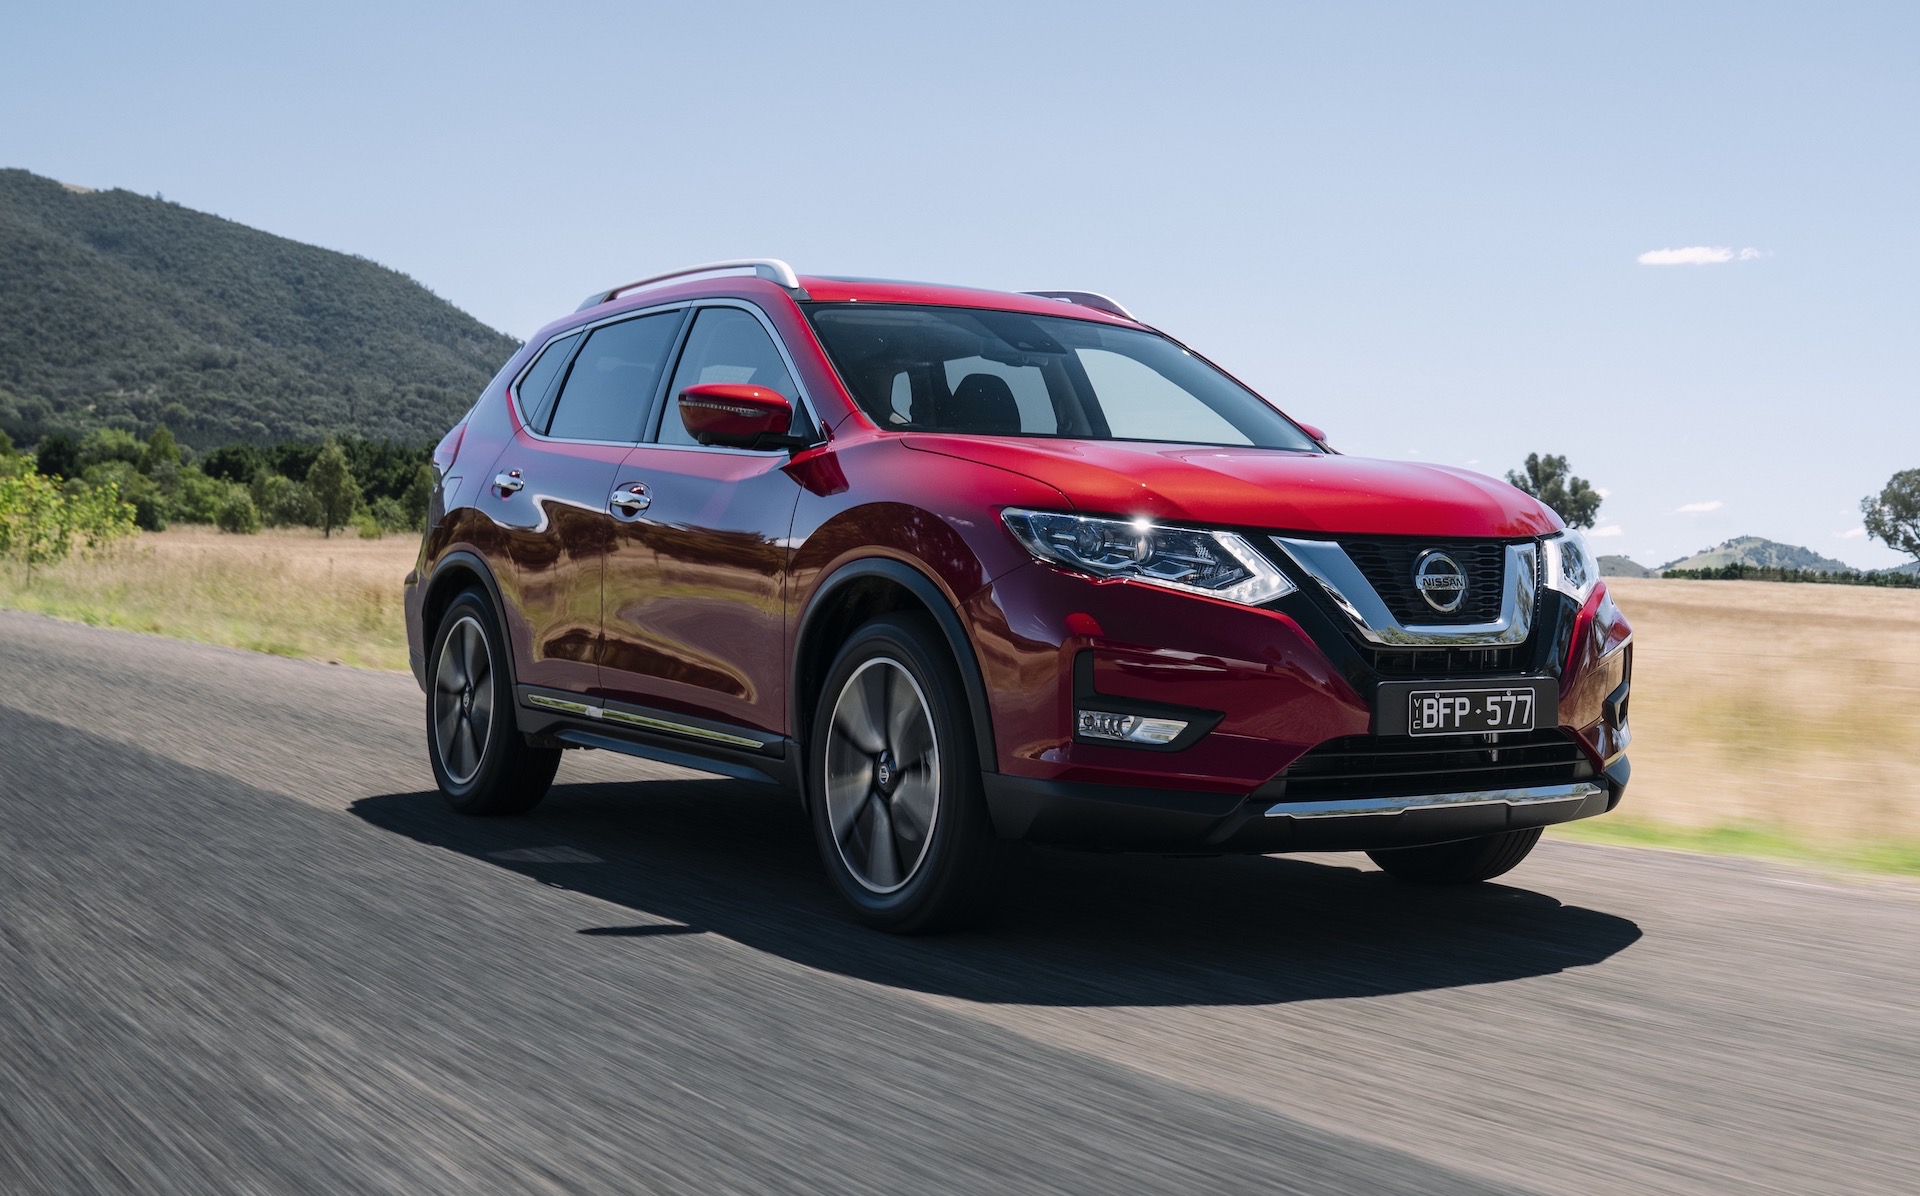 Nissan updates X-Trail with new ST+ variant for 2022